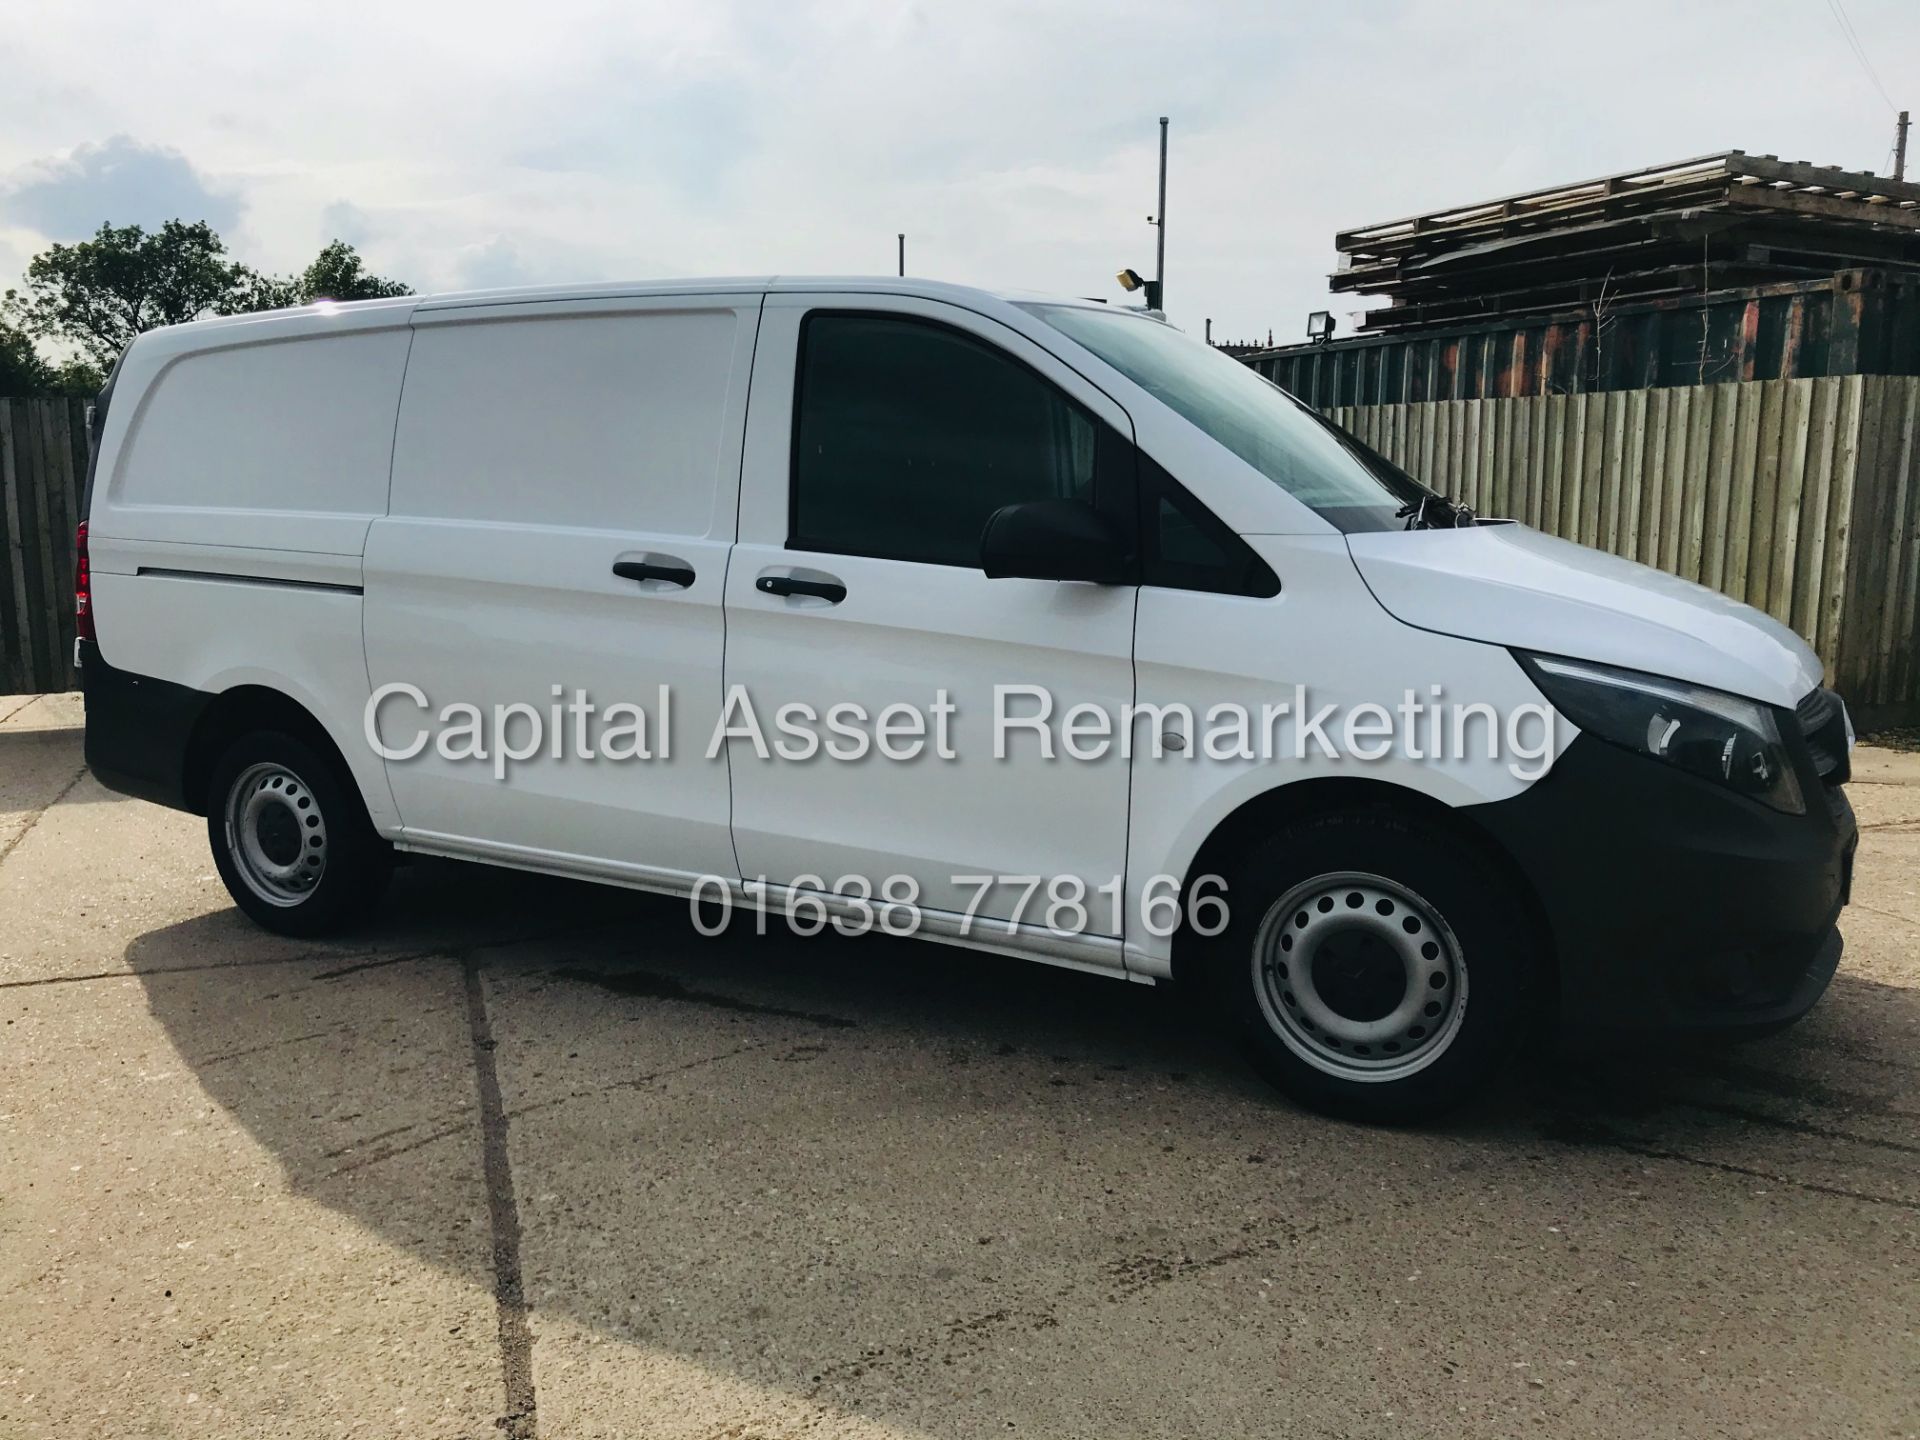 ON SALE MERCEDES VITO 111CDI "LWB" (2018 MODEL) 1 OWNER *AIR CON* ELEC PACK - CRUISE -*EURO 6*